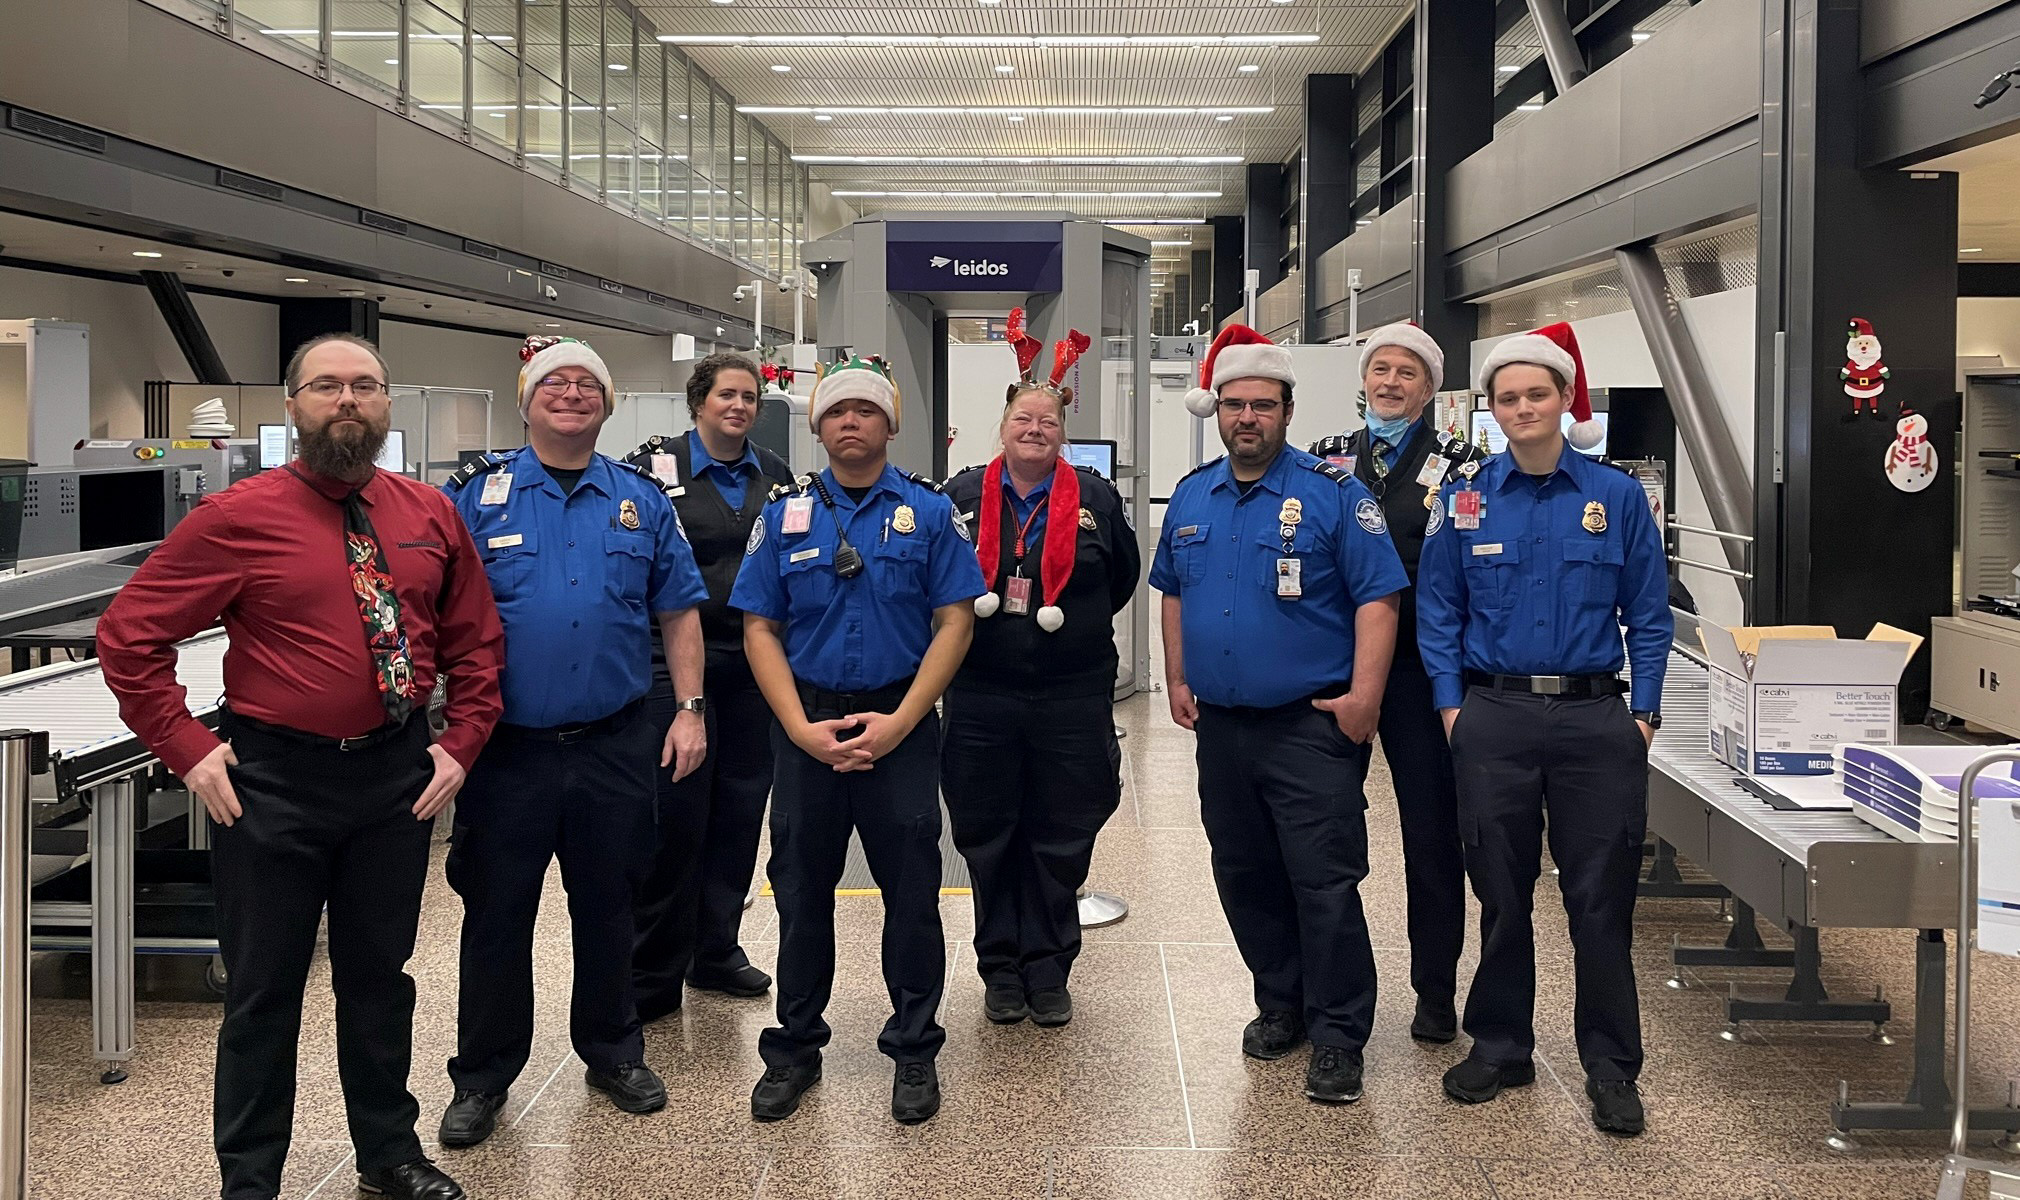 TSA team members at Seattle-Tacoma International Airport (SEA) who participated in Snowball Express and welcomed families of fallen soldiers at SEA. From left, TSA Manager BrookHunter Whelchel, TSA Officers Hayes Lanier and Jessica Smith, Lead Officer Richard Calalang, Supervisory Officer Teri Shoemaker, Officers Damacio Lopez, James Jaeger and Kyle Fancher. (Photo courtesy of TSA SEA)